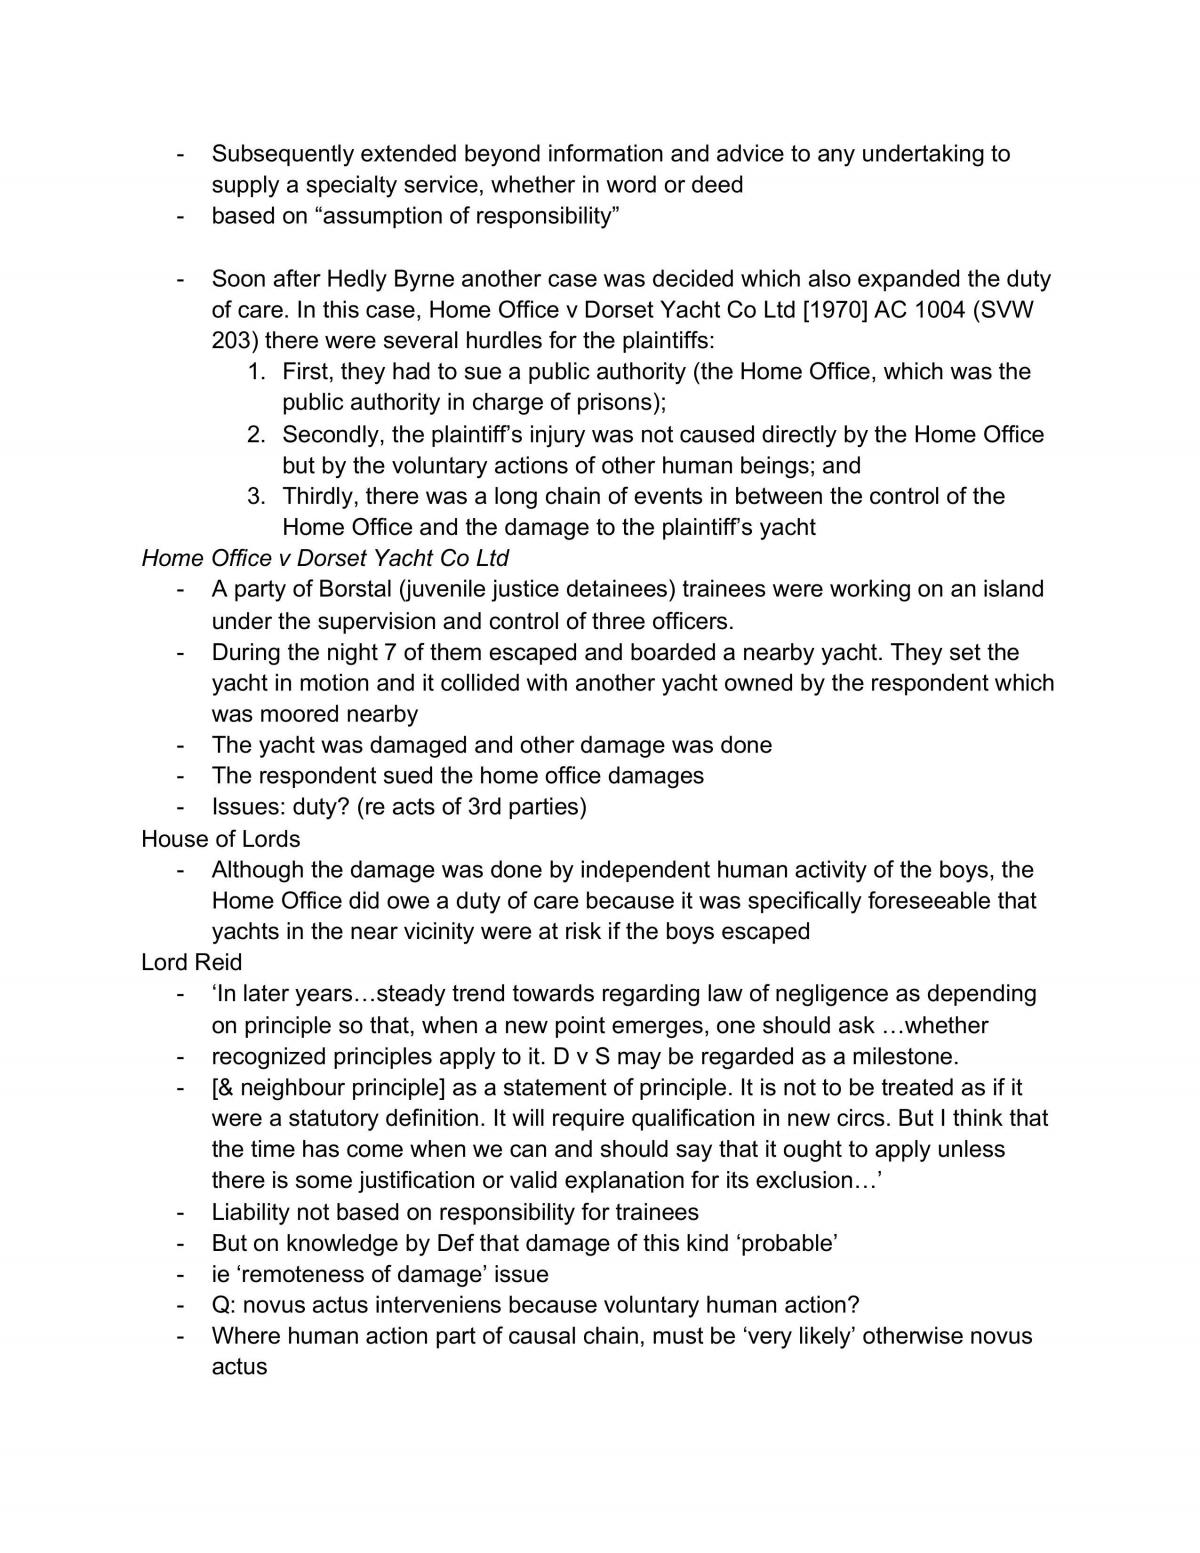 LAW203 Week 5-13 Notes - Page 3